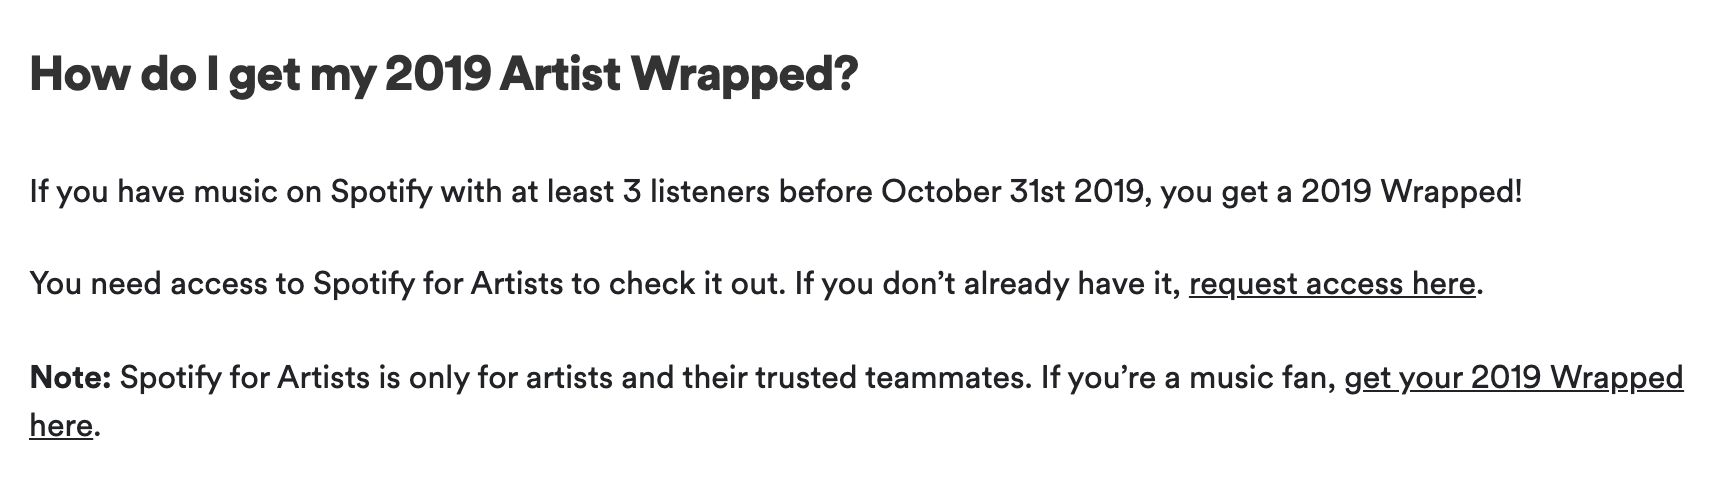 Screenshot of Spotify FAQ answering the question “How do I get my 2019 Artist Wrapped?” with the first line of the answer being “If you have music on Spotify with at least 3 listeners before October 31st 2019, you get a 2019 Wrapped!